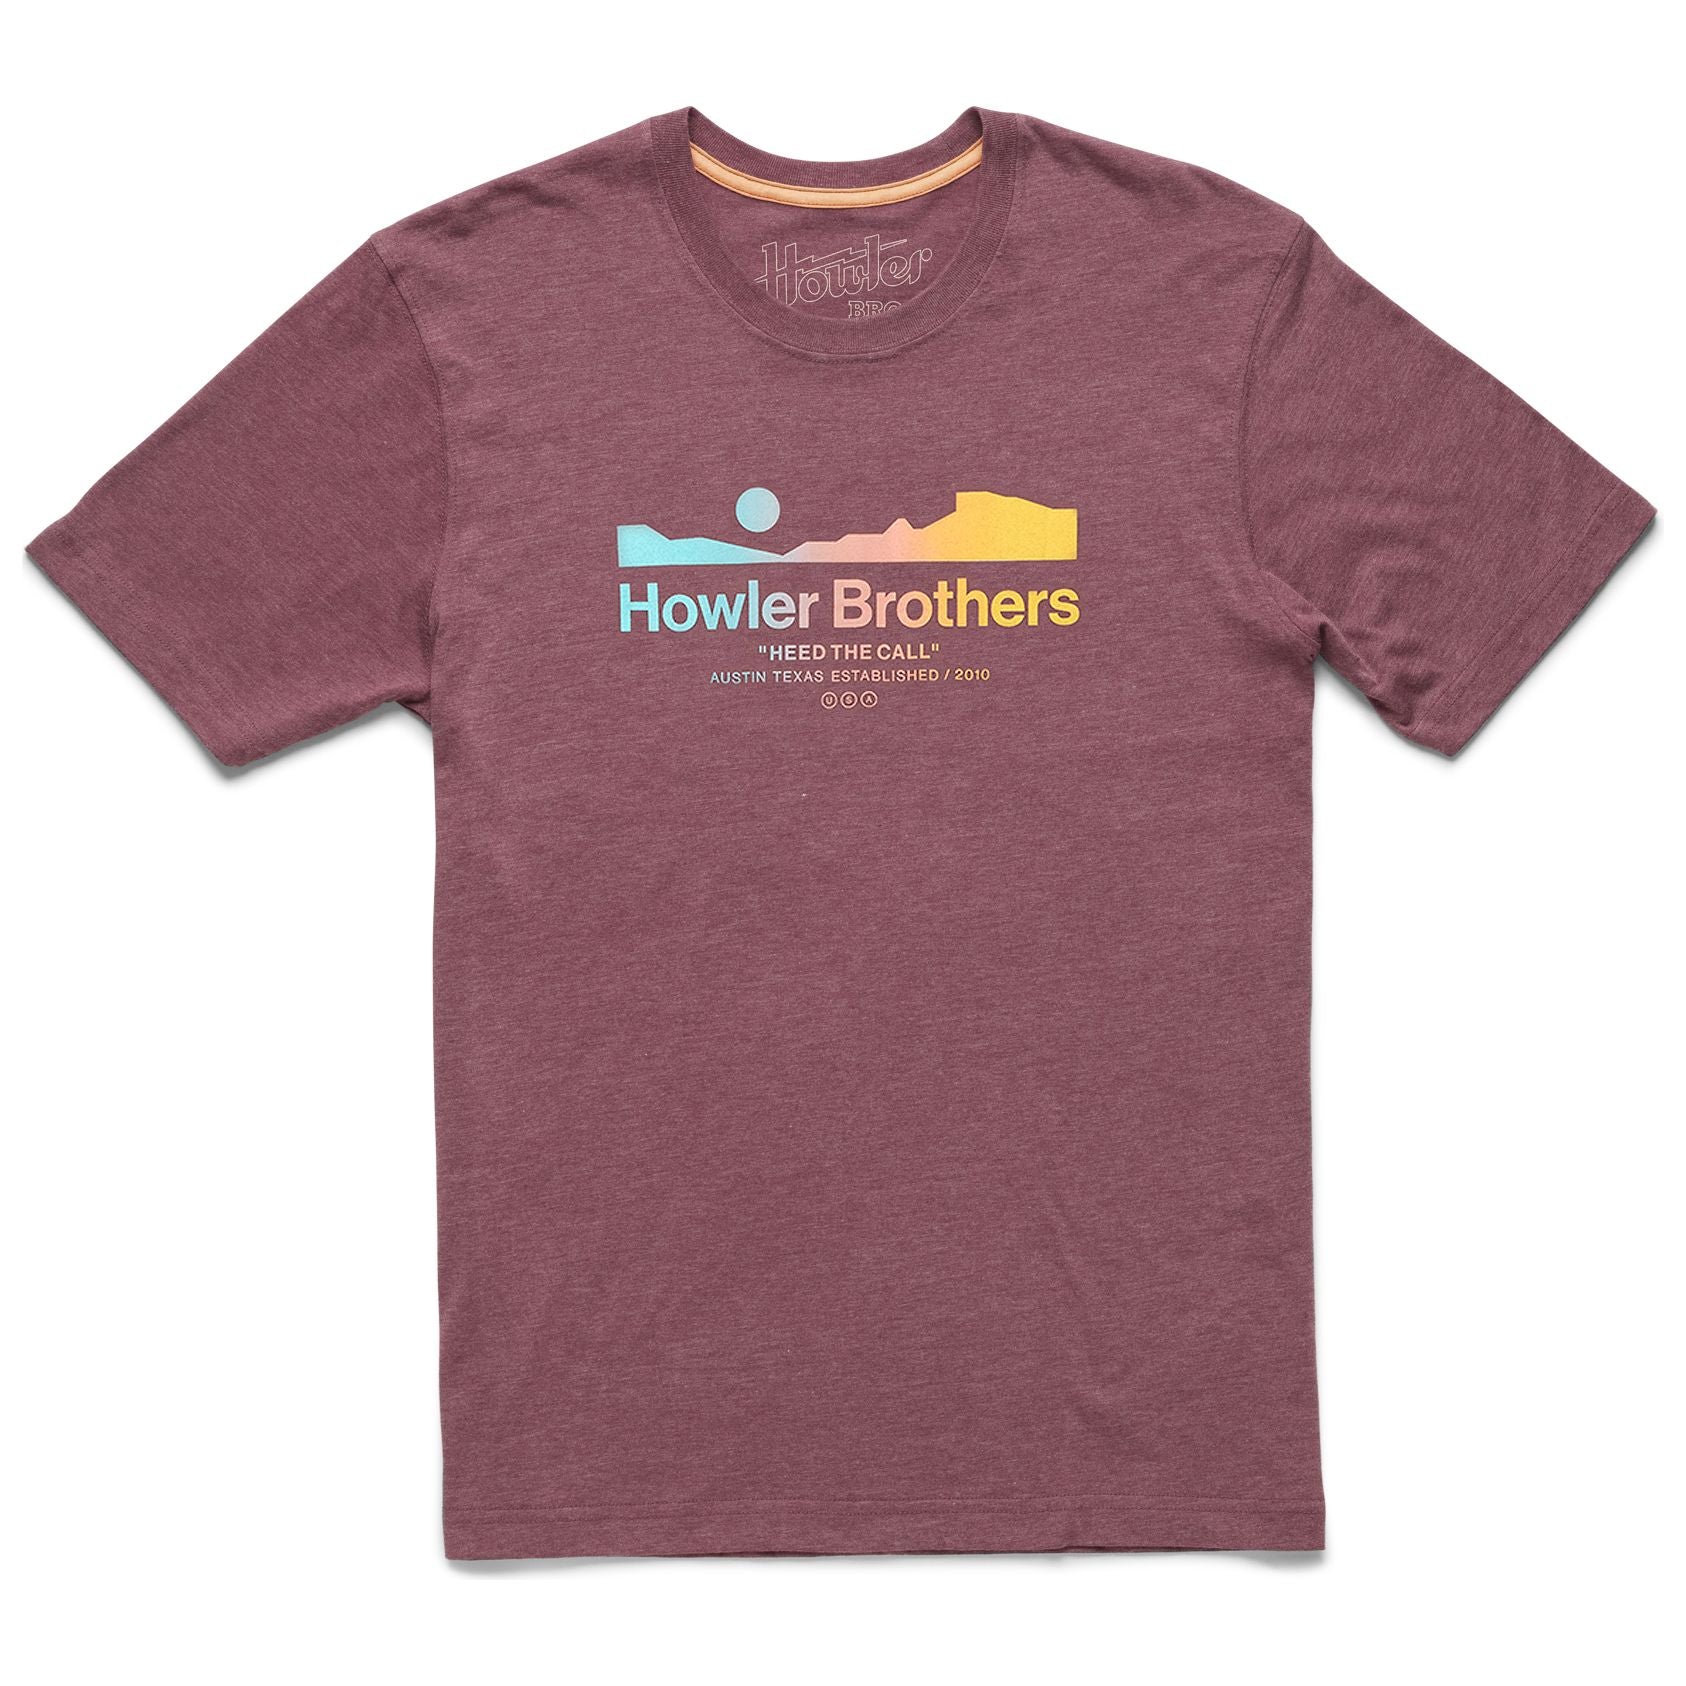 Howler Brothers Select T - Howler Arroyo Fade : Plum Wine Image 01